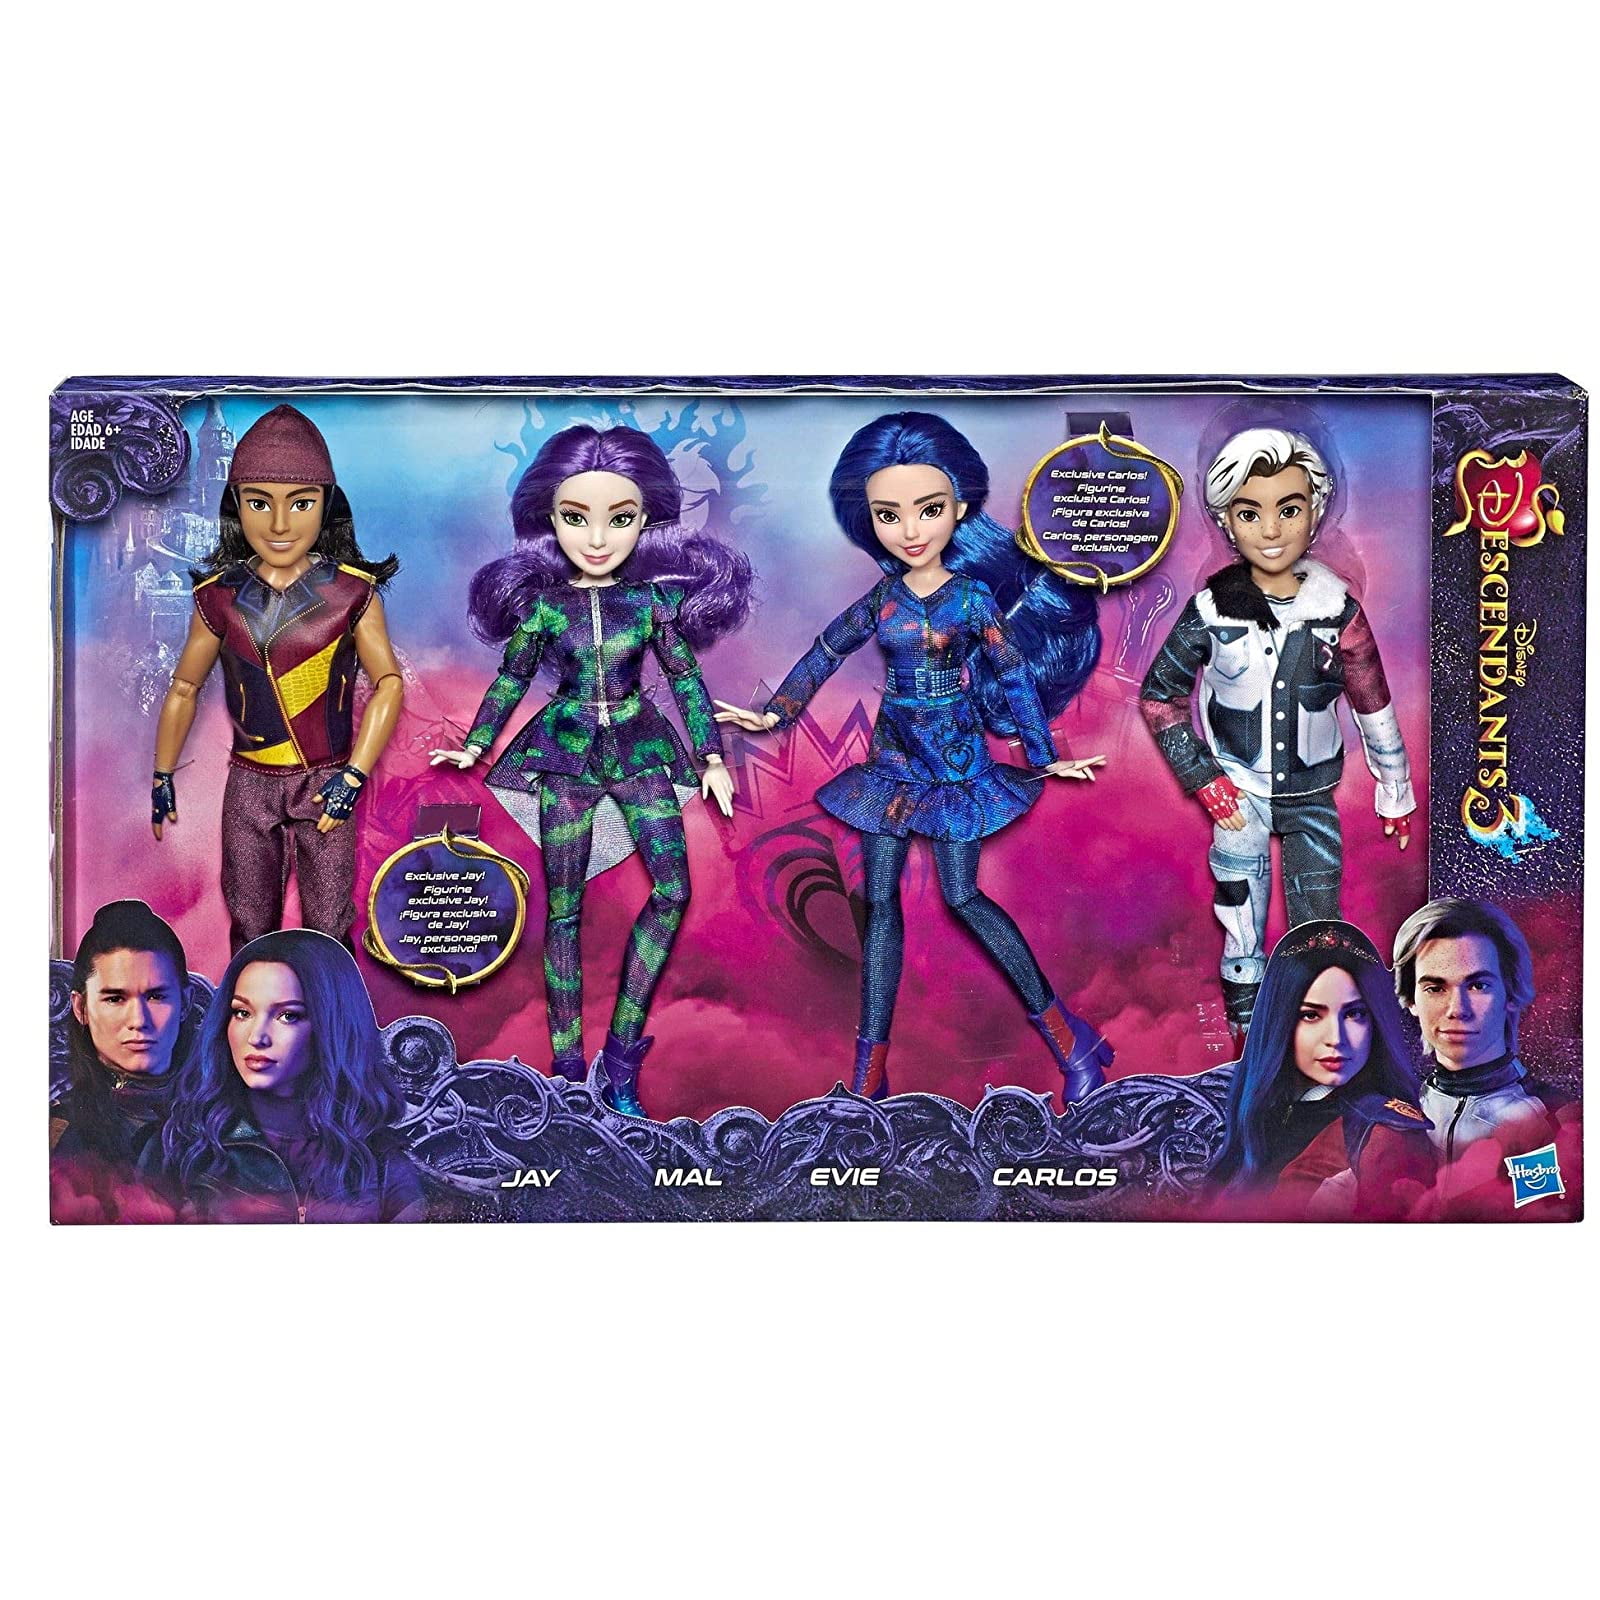 DESCENDANTS 2 MOVIE ISLE STYLE SWITCH MAL DOLL - The Toy Insider